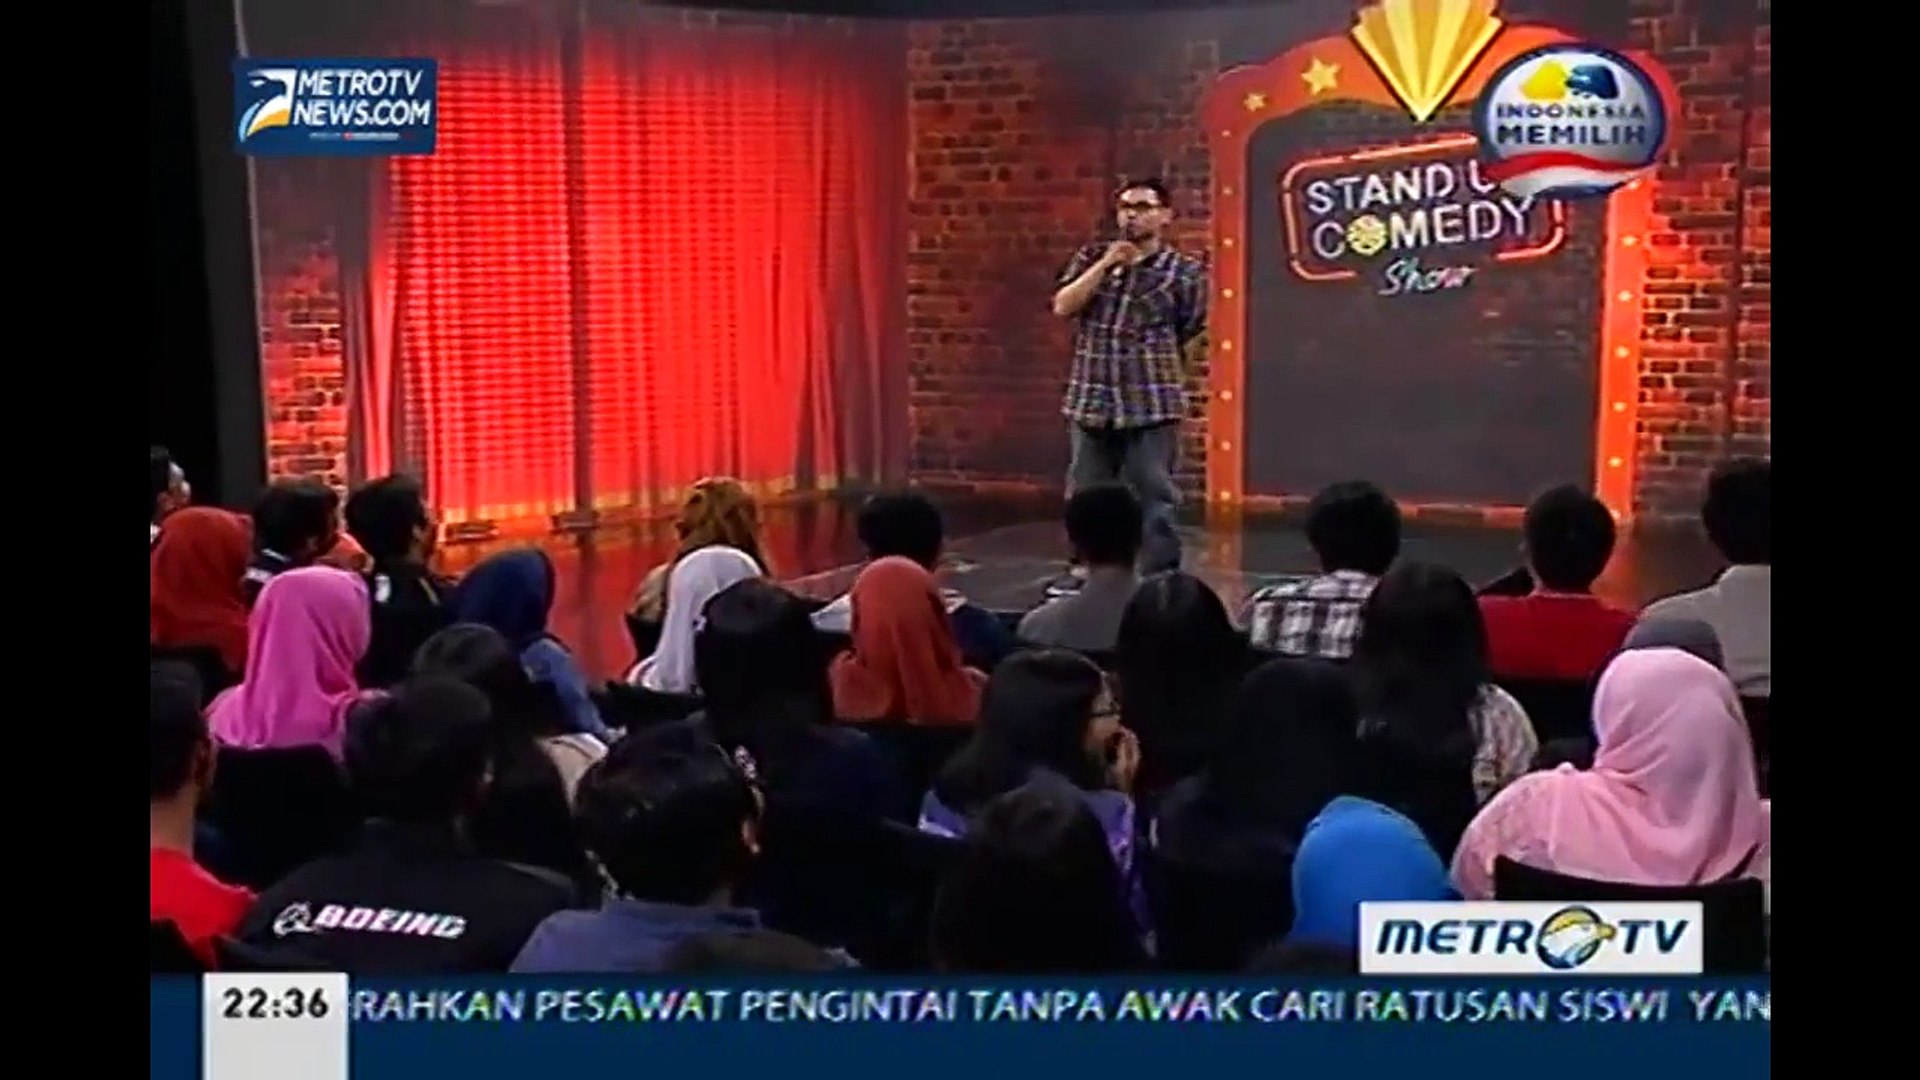 Stand Up Comedy Show: Faisal